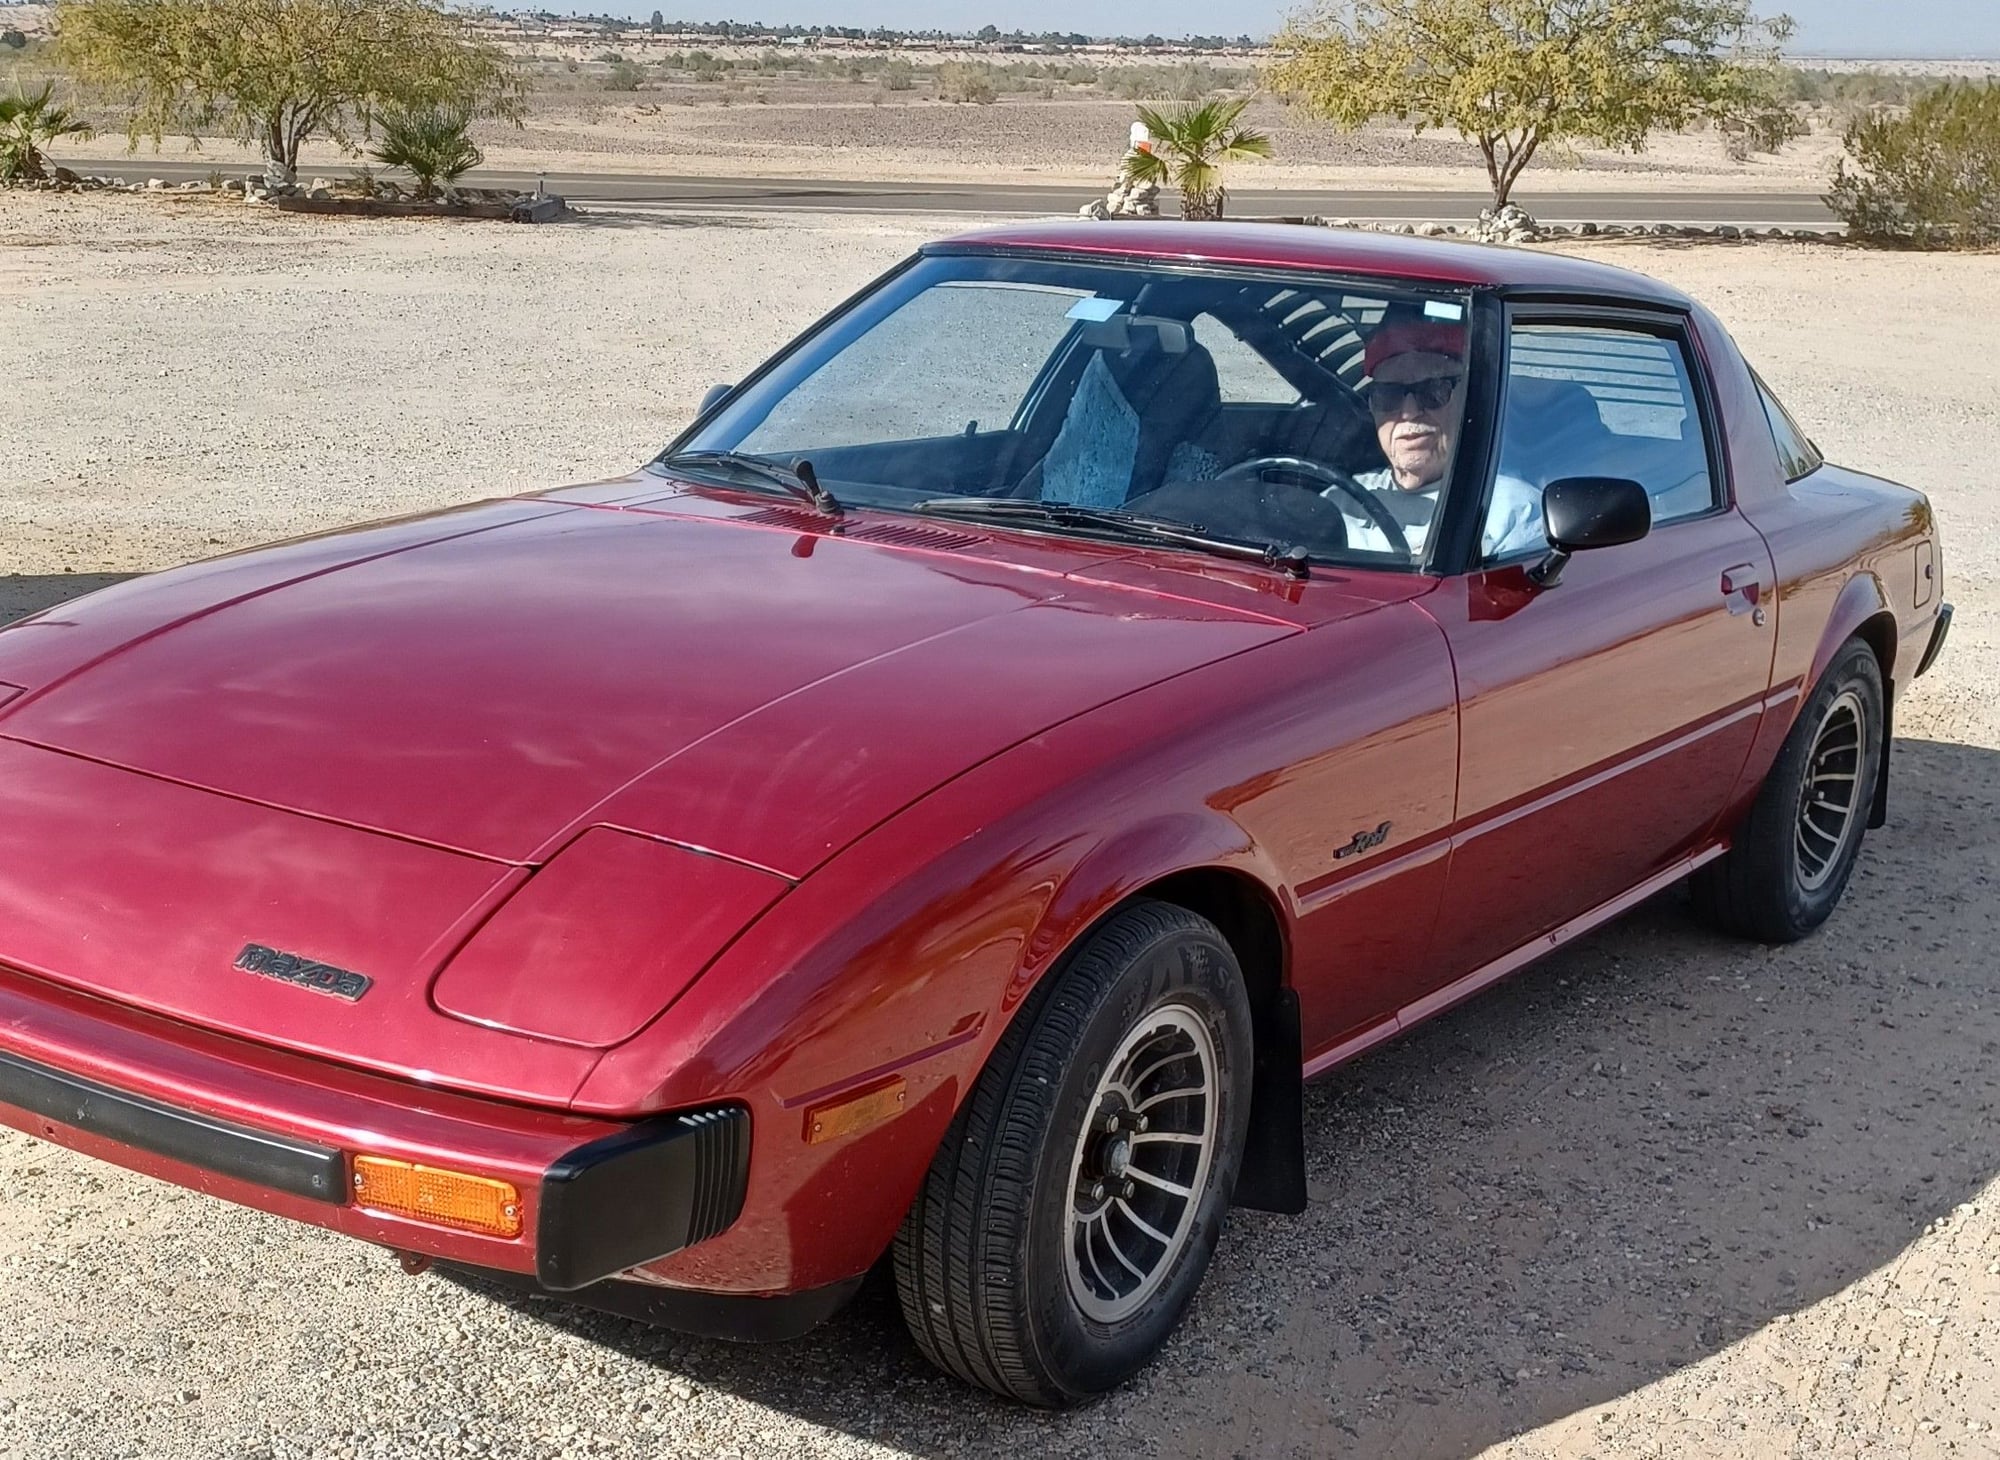 1980 Mazda RX-7 - 1980 Series 1 RX7 - Used - VIN SA22C597736 - 76,000 Miles - Other - 2WD - Manual - Coupe - Red - Yuma, AZ 85367, United States